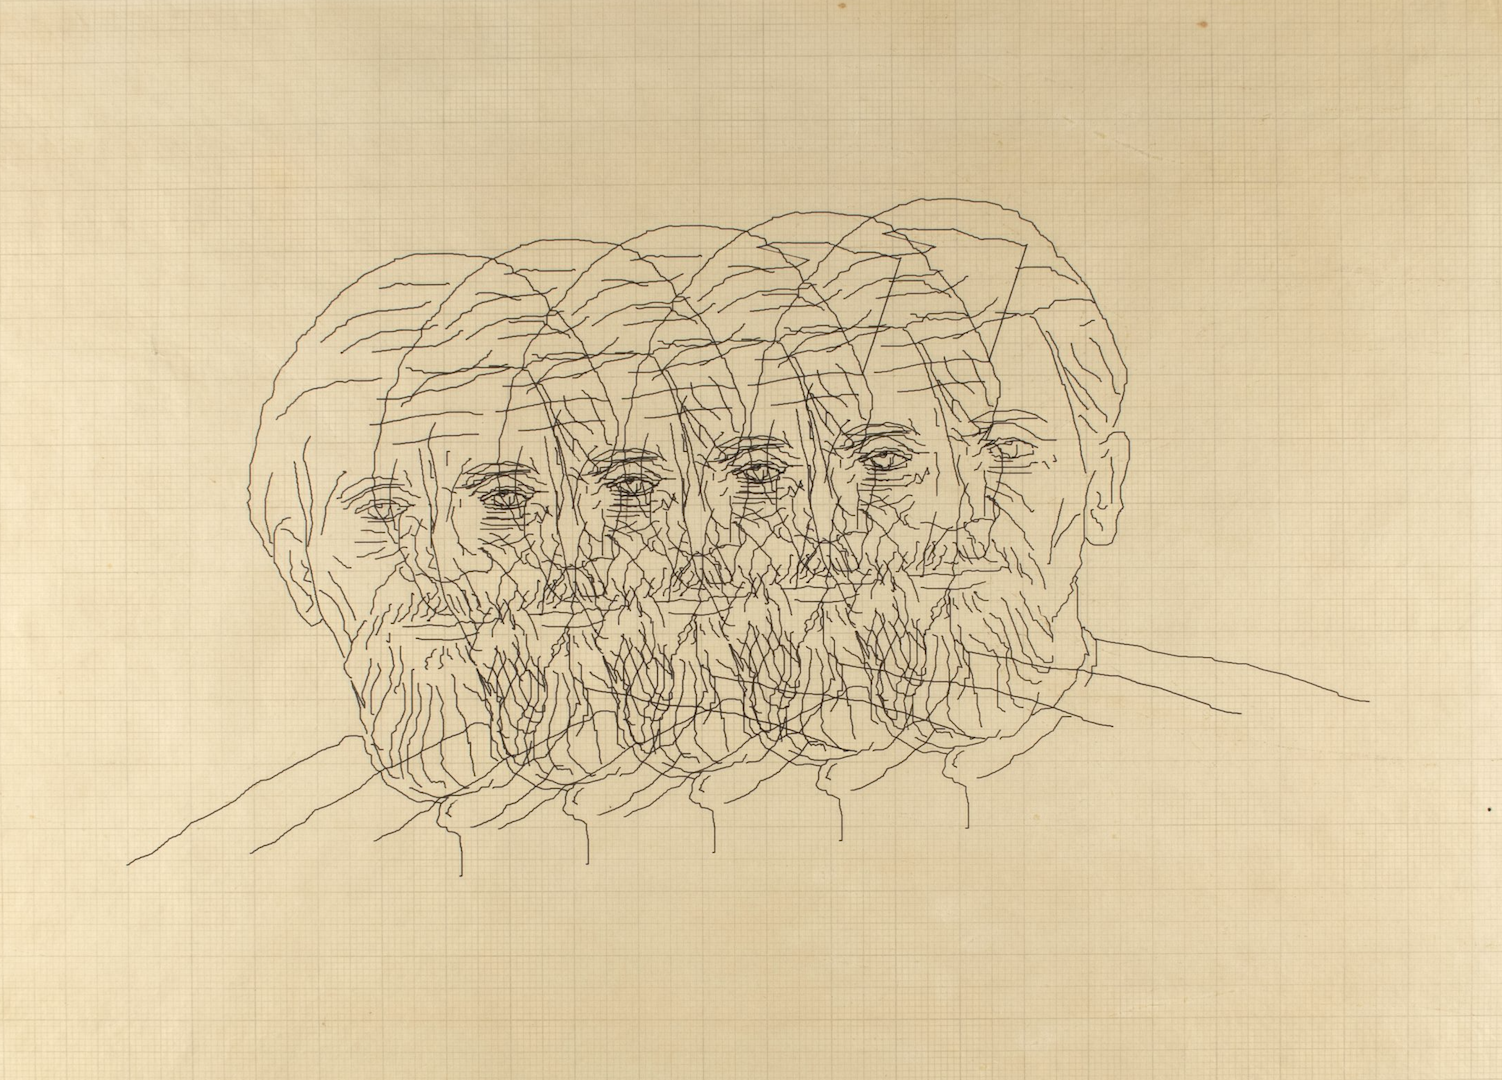 Charles “Chuck” Csuri, Five Faces, 1966. Courtesy of The Anne and Michael Spalter Digital Art Collection